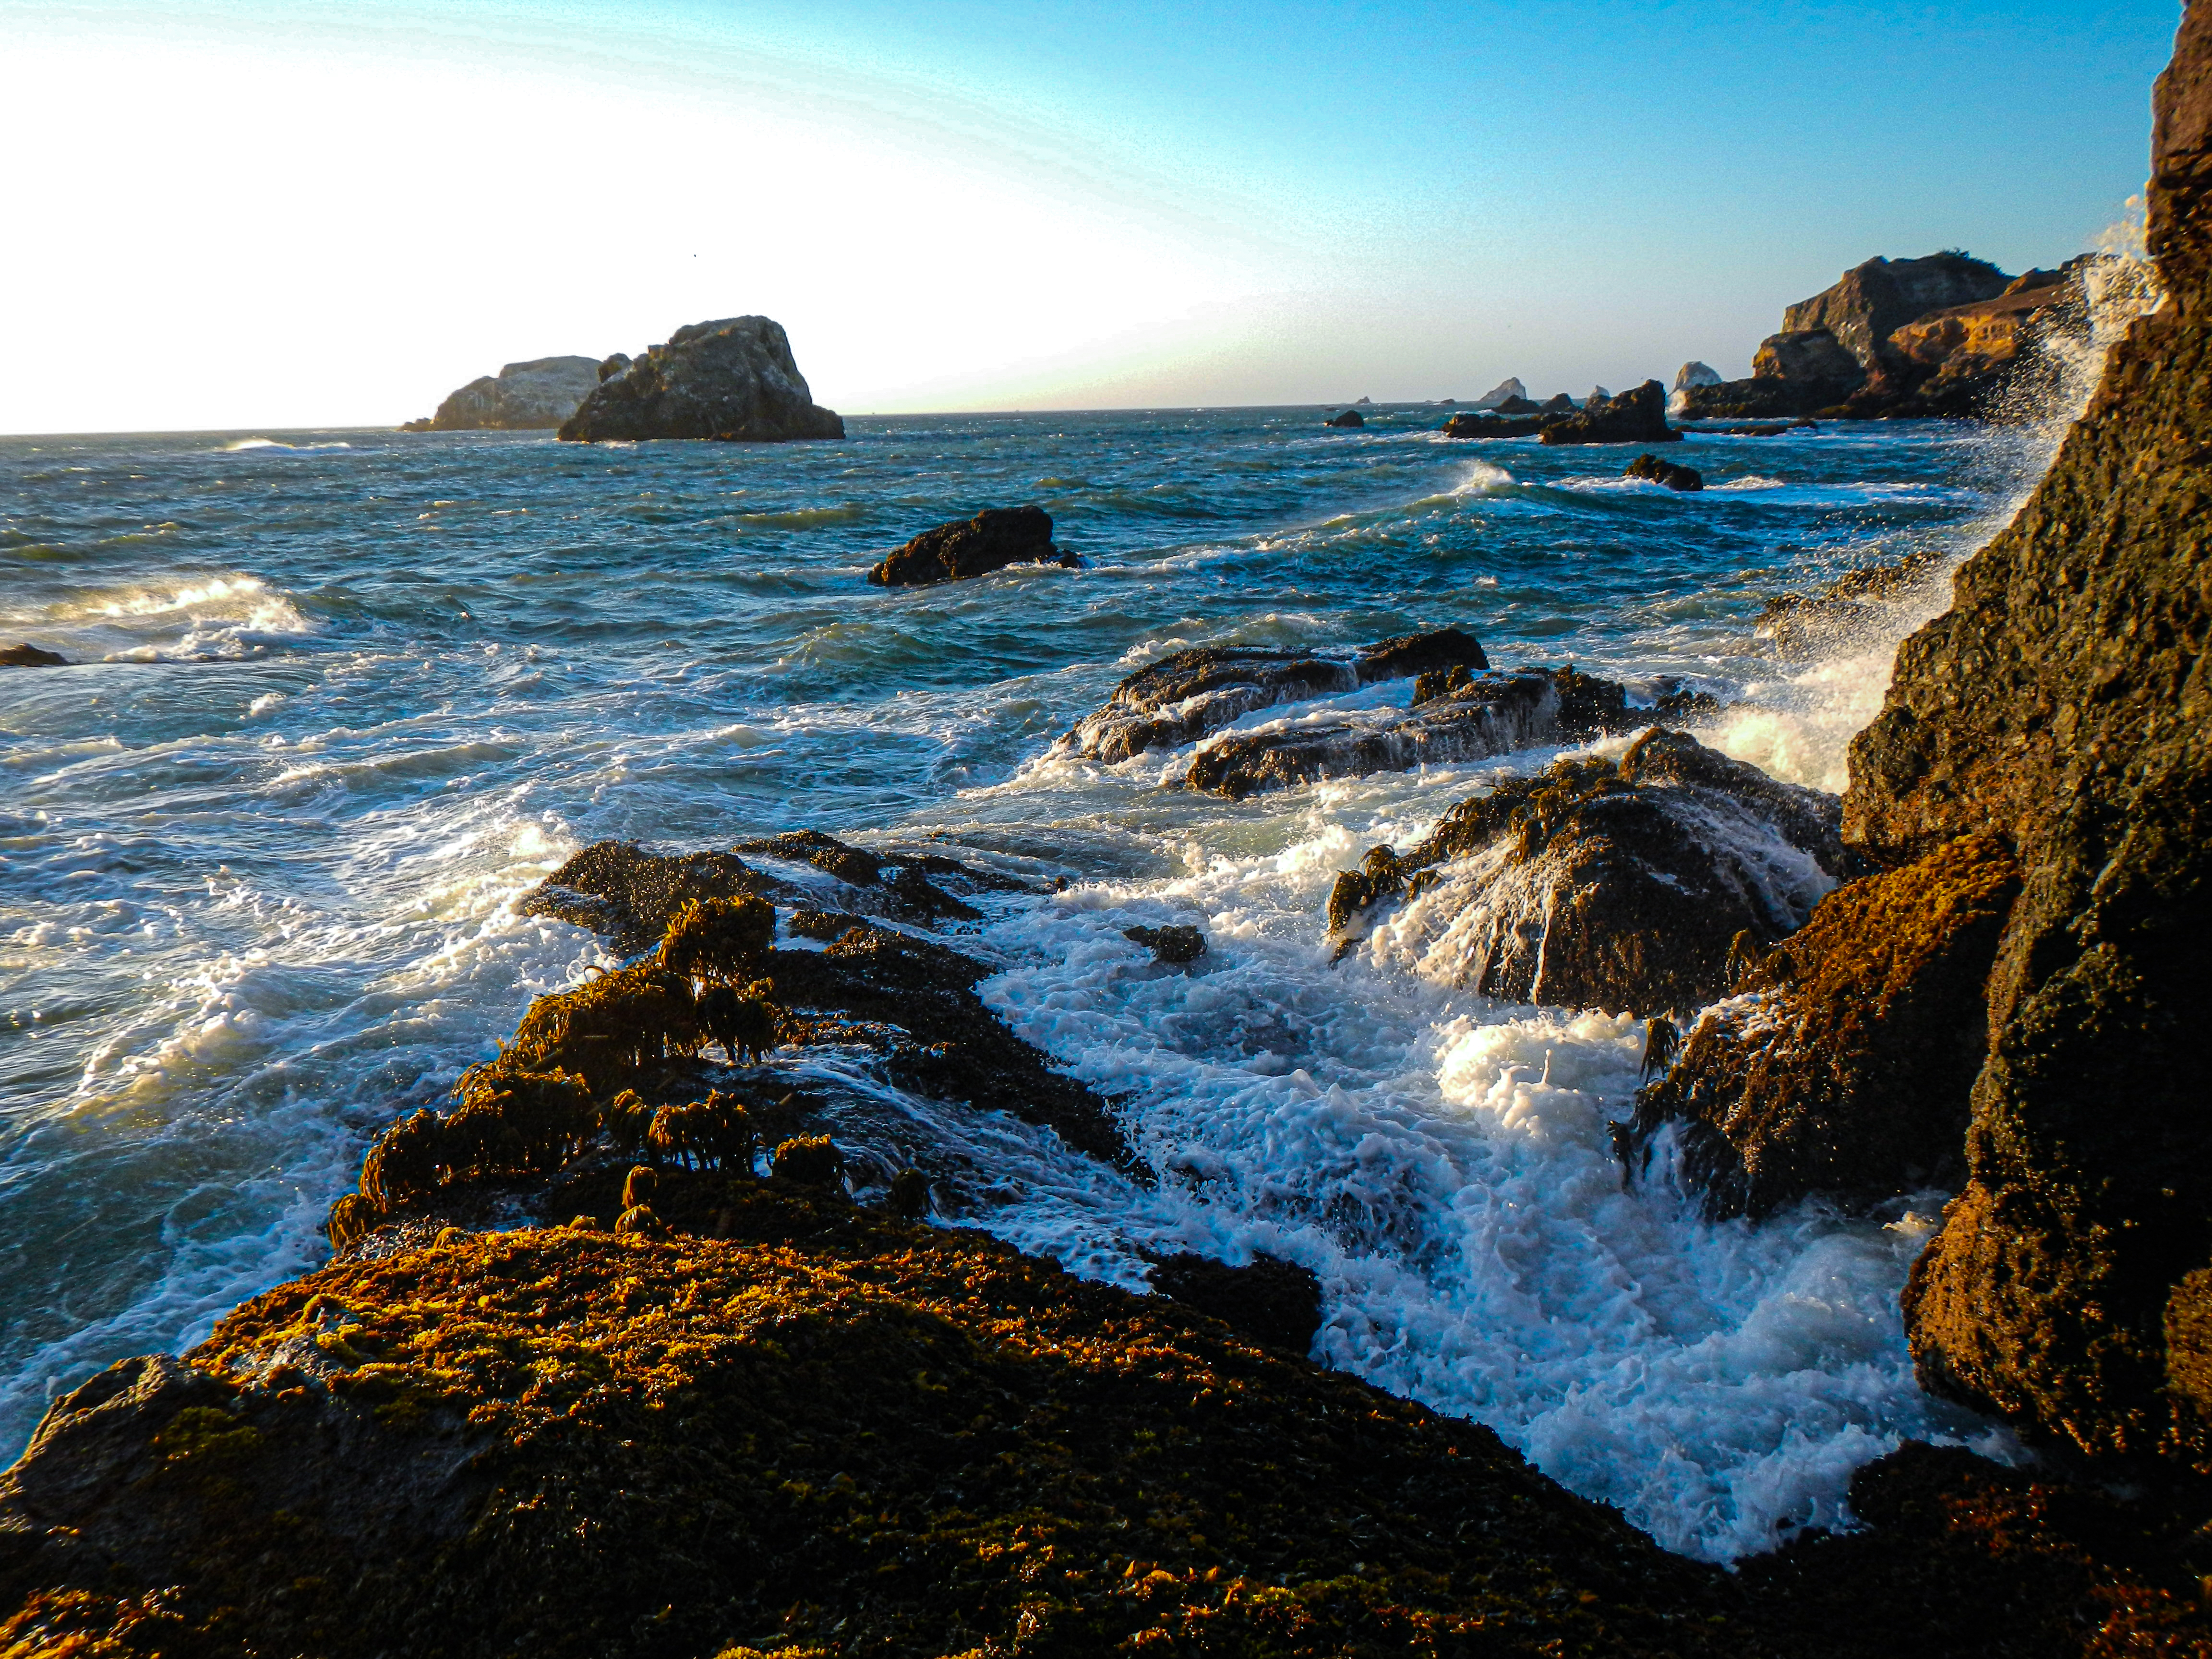 A rocky coastline with evening light and foamy waves splashing against the stones.